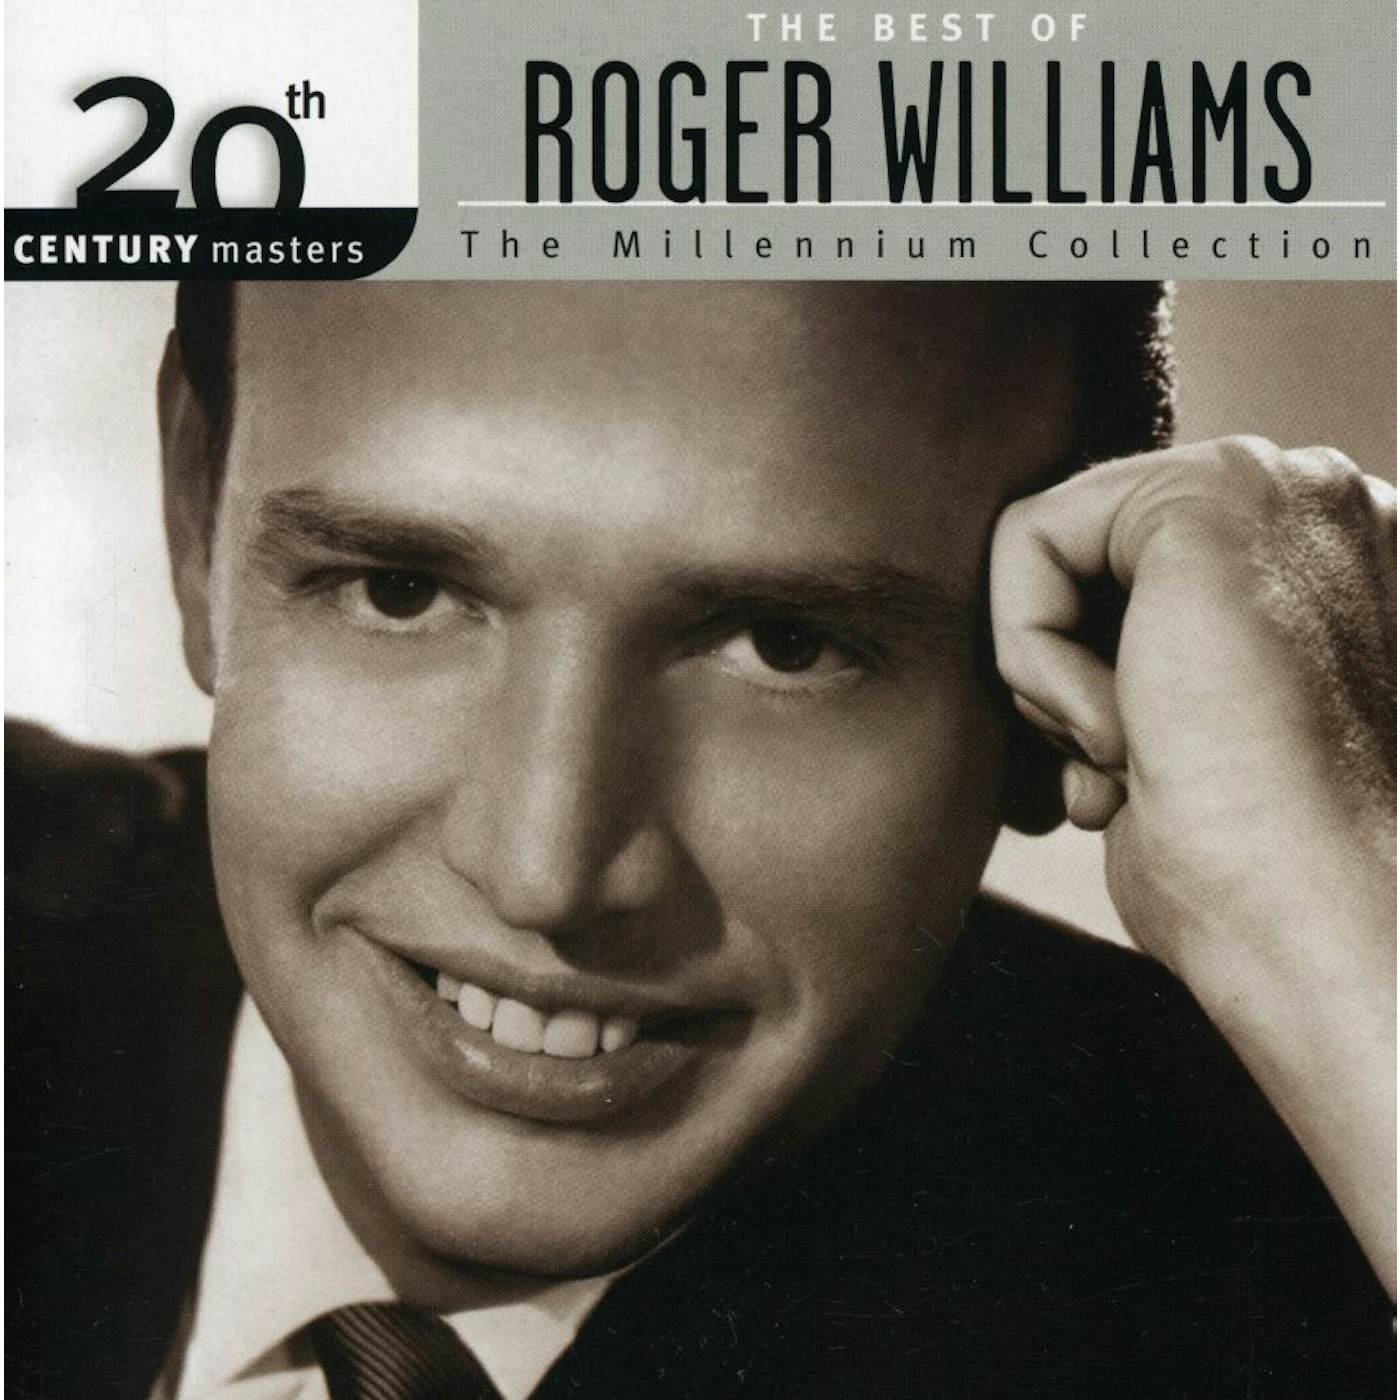 Roger Williams 20TH CENTURY MASTERS: MILLENNIUM COLLECTION CD